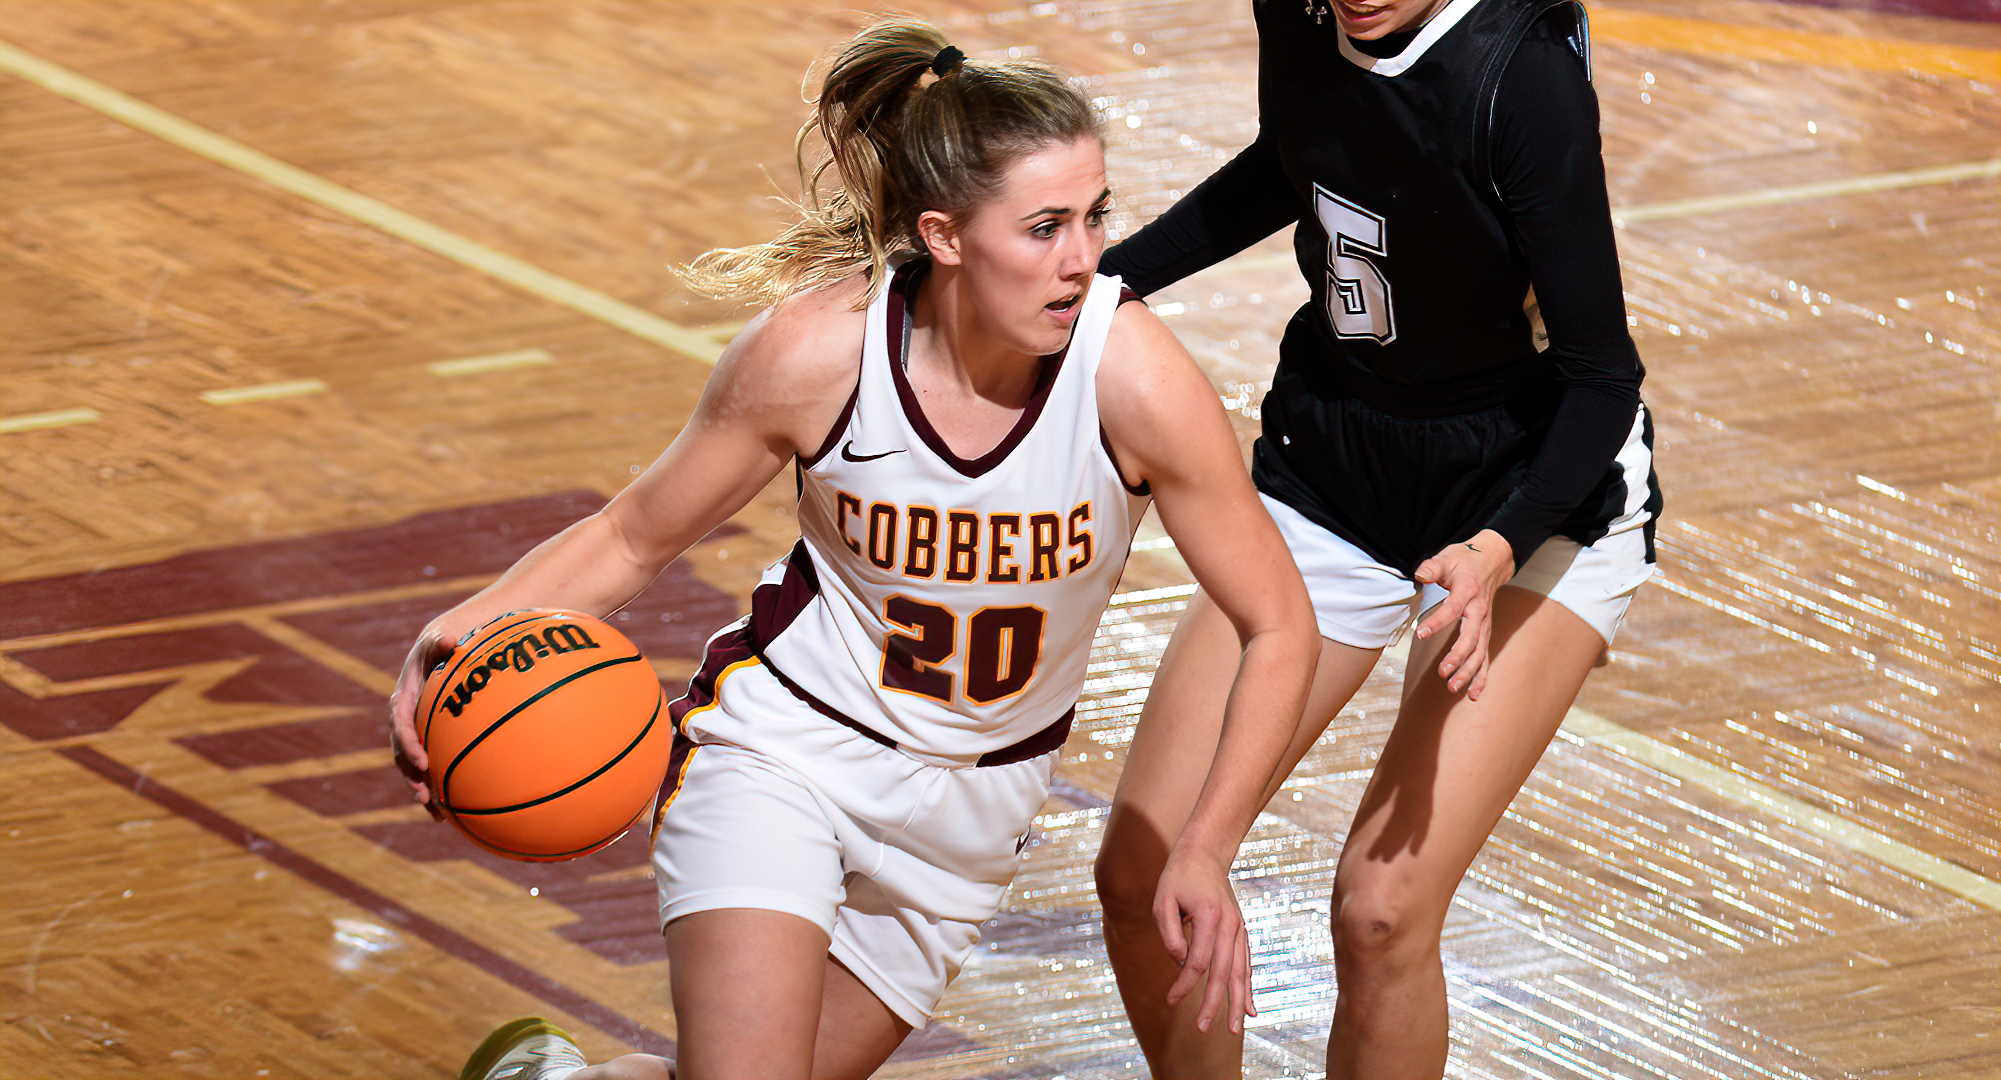 Senior Emily Beseman was a perfect 10-for-10 at the free throw line and finished with a team-high 16 points in the Cobbers' win at St. Ben's.